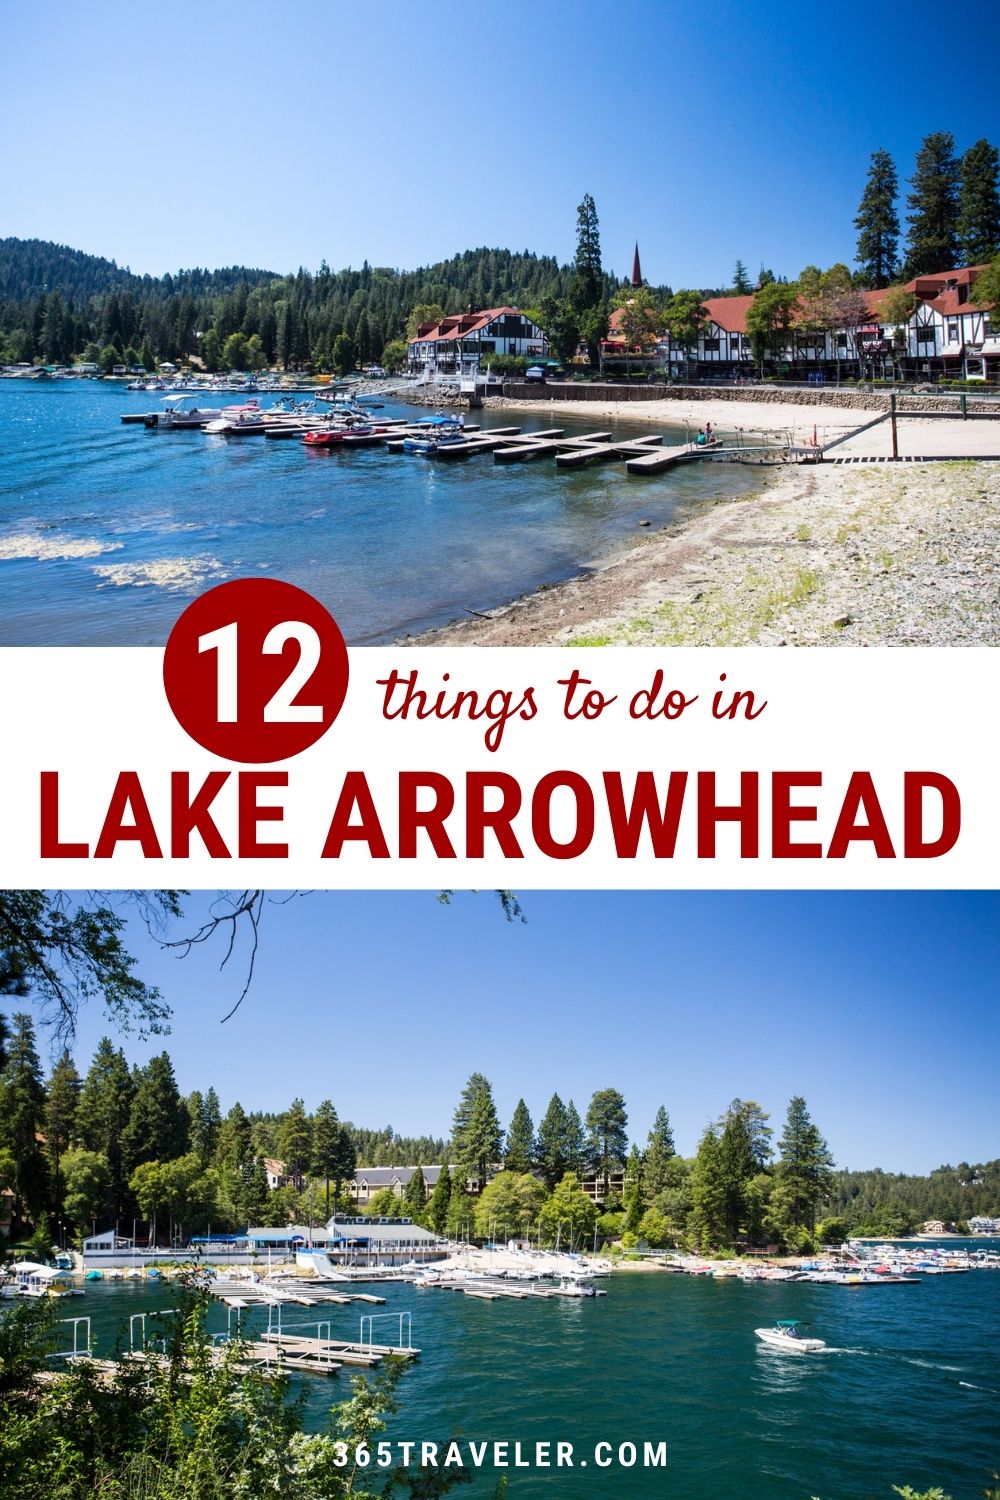 11+ Spectacular Things To Do in Lake Arrowhead, CA